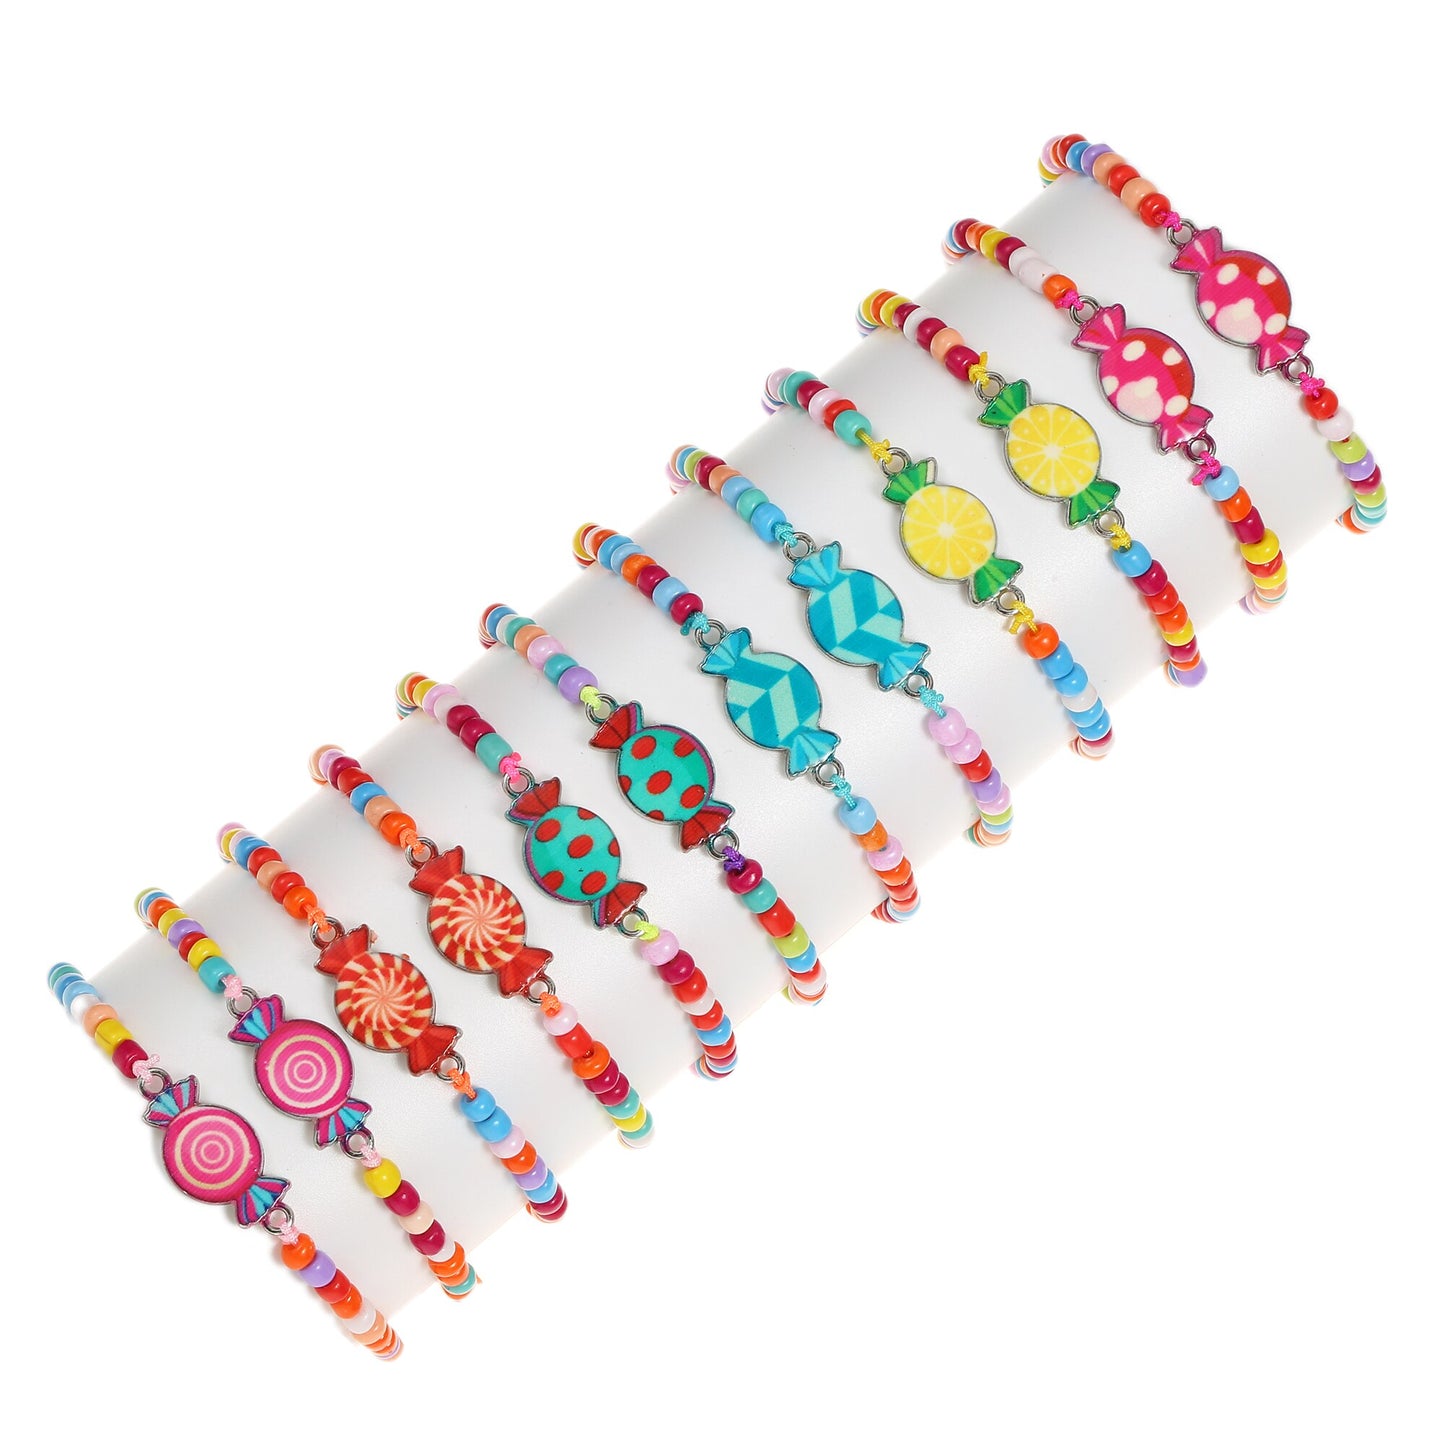 12 Pcs Colorful Cute Candy Charm Bracelet for Girl Kids Handmade Rice Bead Braided Chain Friendship BFF Gifts